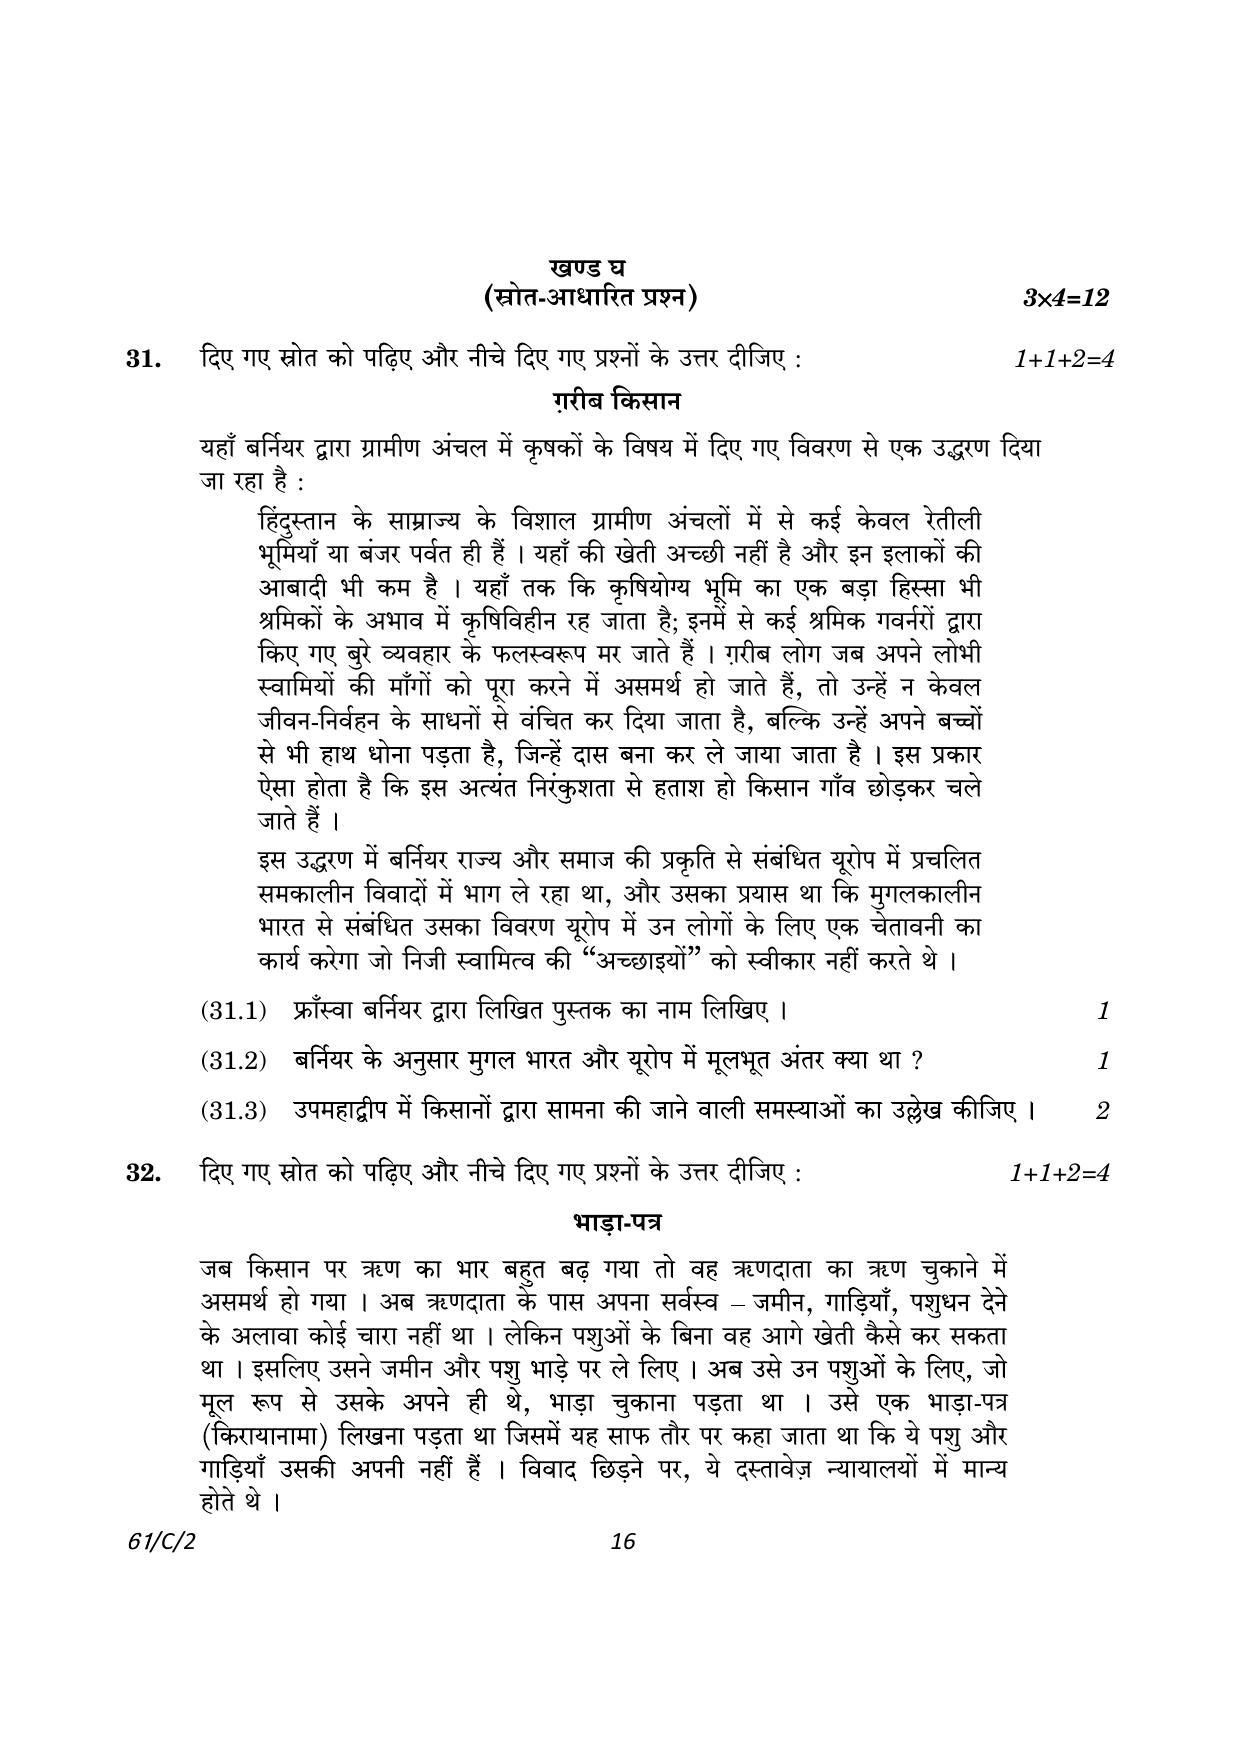 CBSE Class 12 61-2 History 2023 (Compartment) Question Paper - Page 16